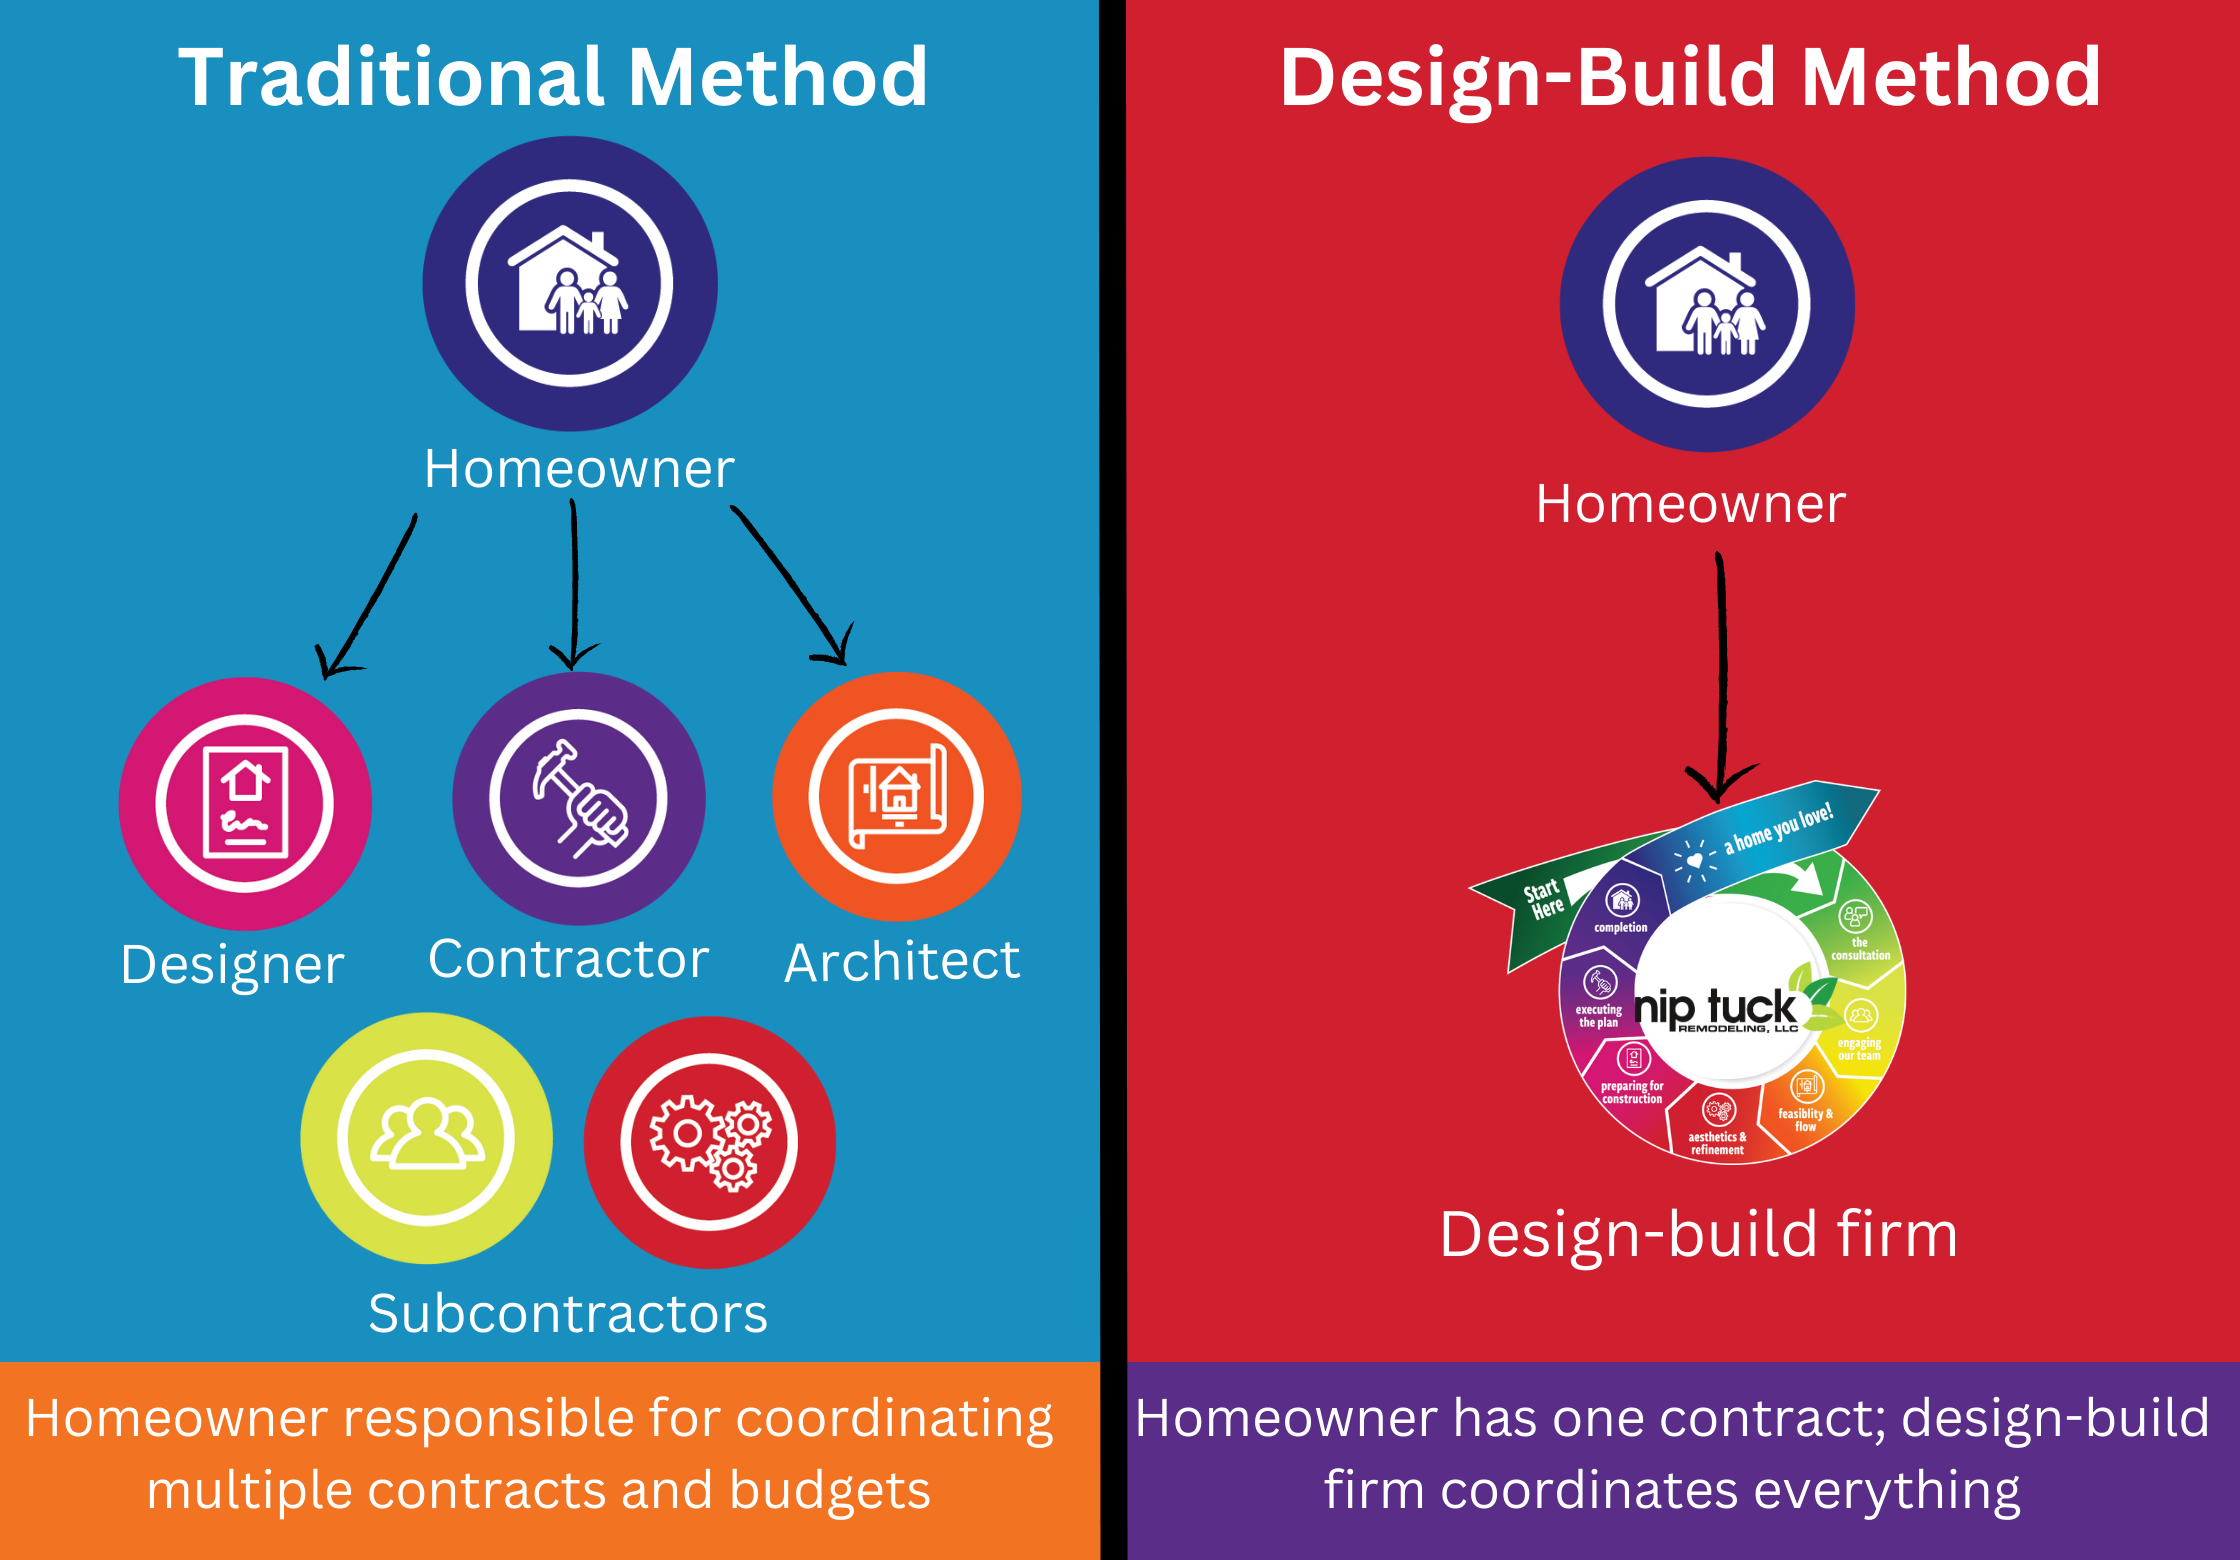 nip tuck remodeling explains the difference between design-bid-build and design-build and why design-build benefits homeowners in this graphic